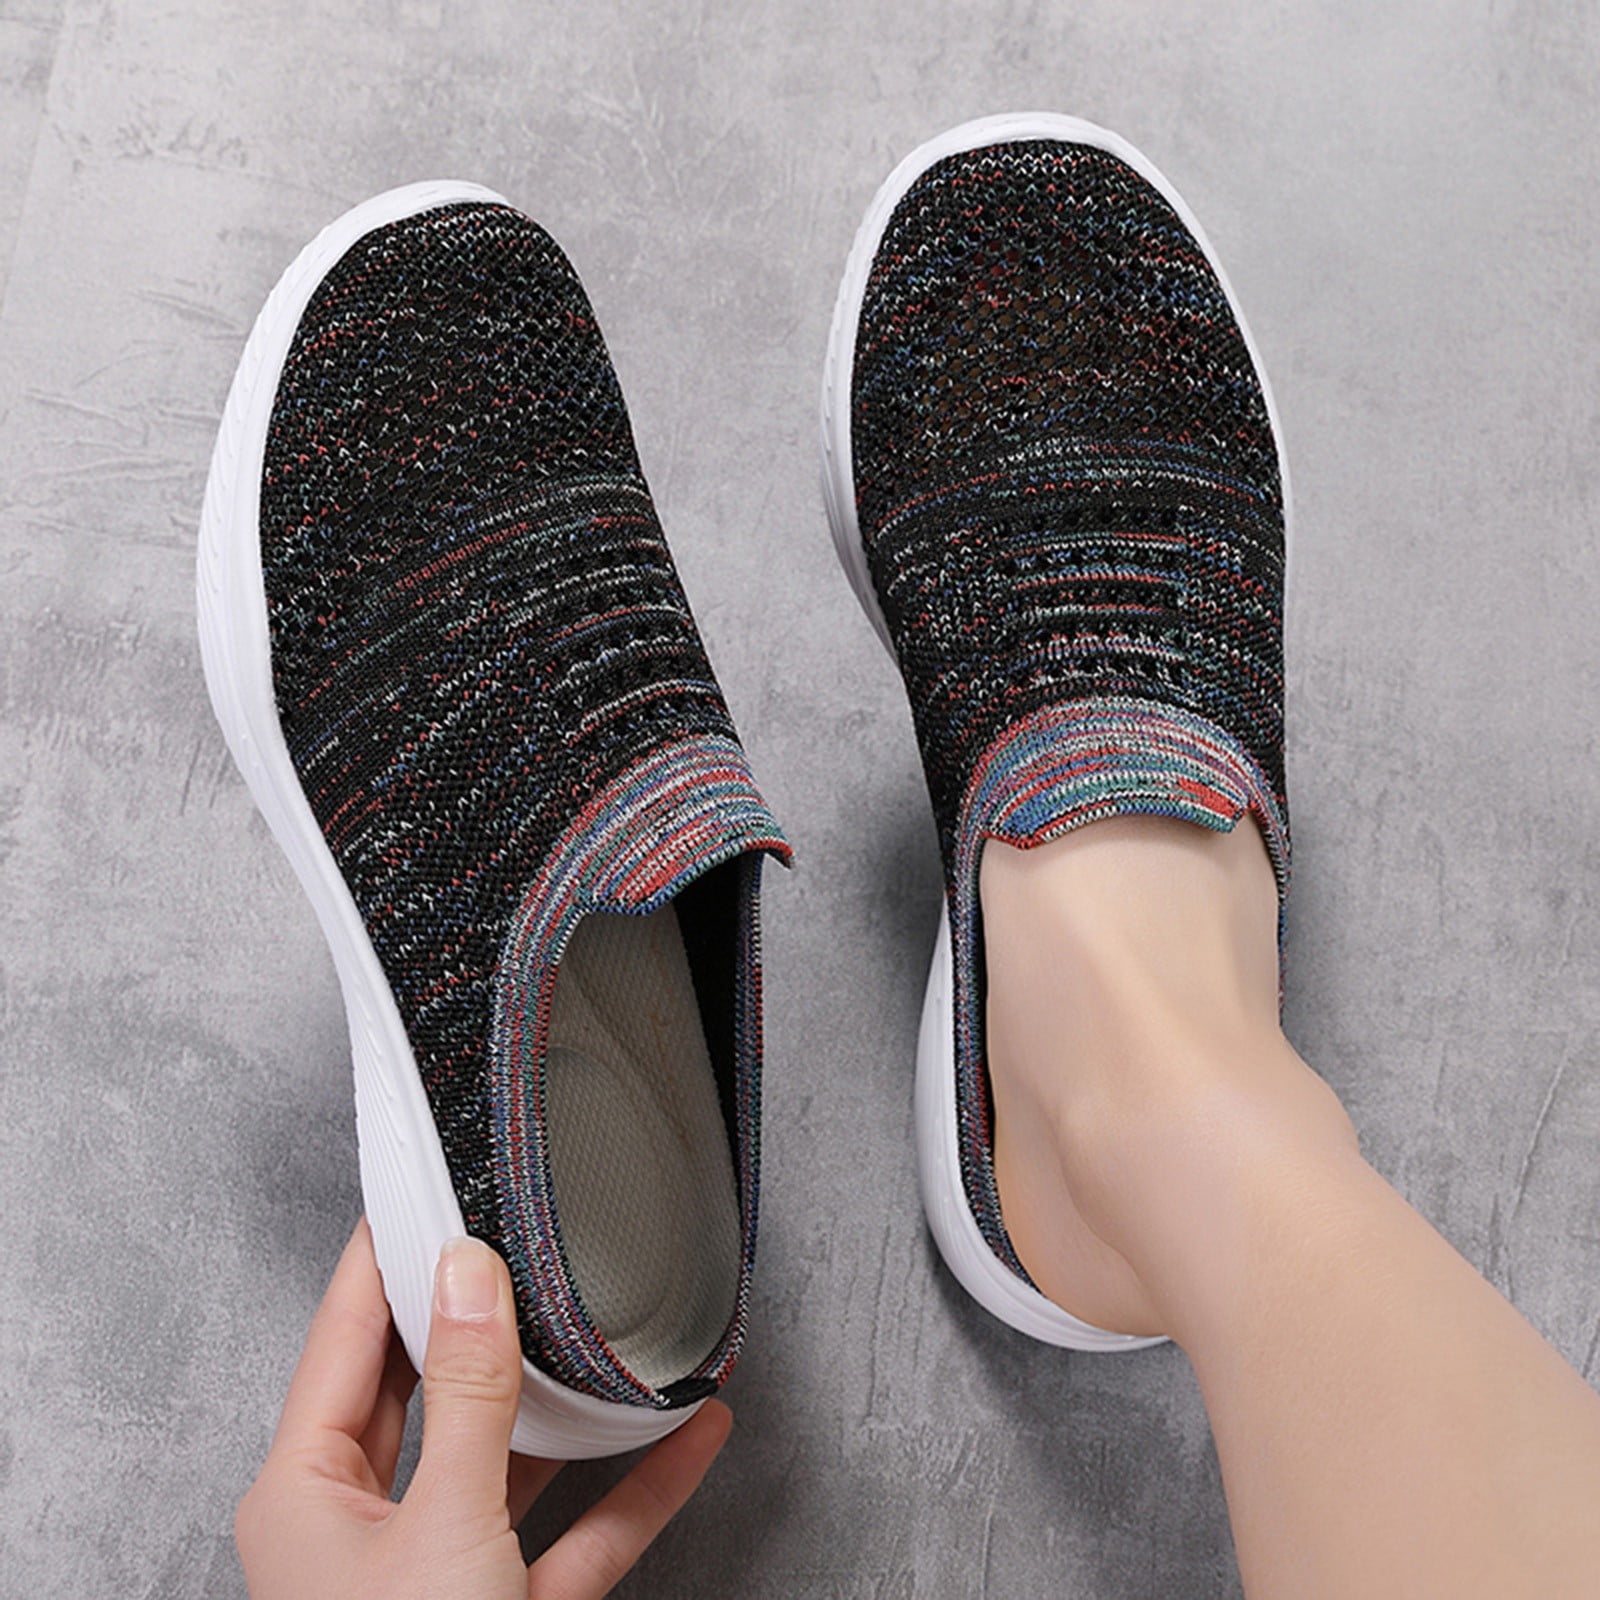 ability foolish Shine autumn winter shoes Fashion Women's Casual Shoes Breathable Slip-on Wedges  Outdoor Leisure Sneakers - Walmart.com